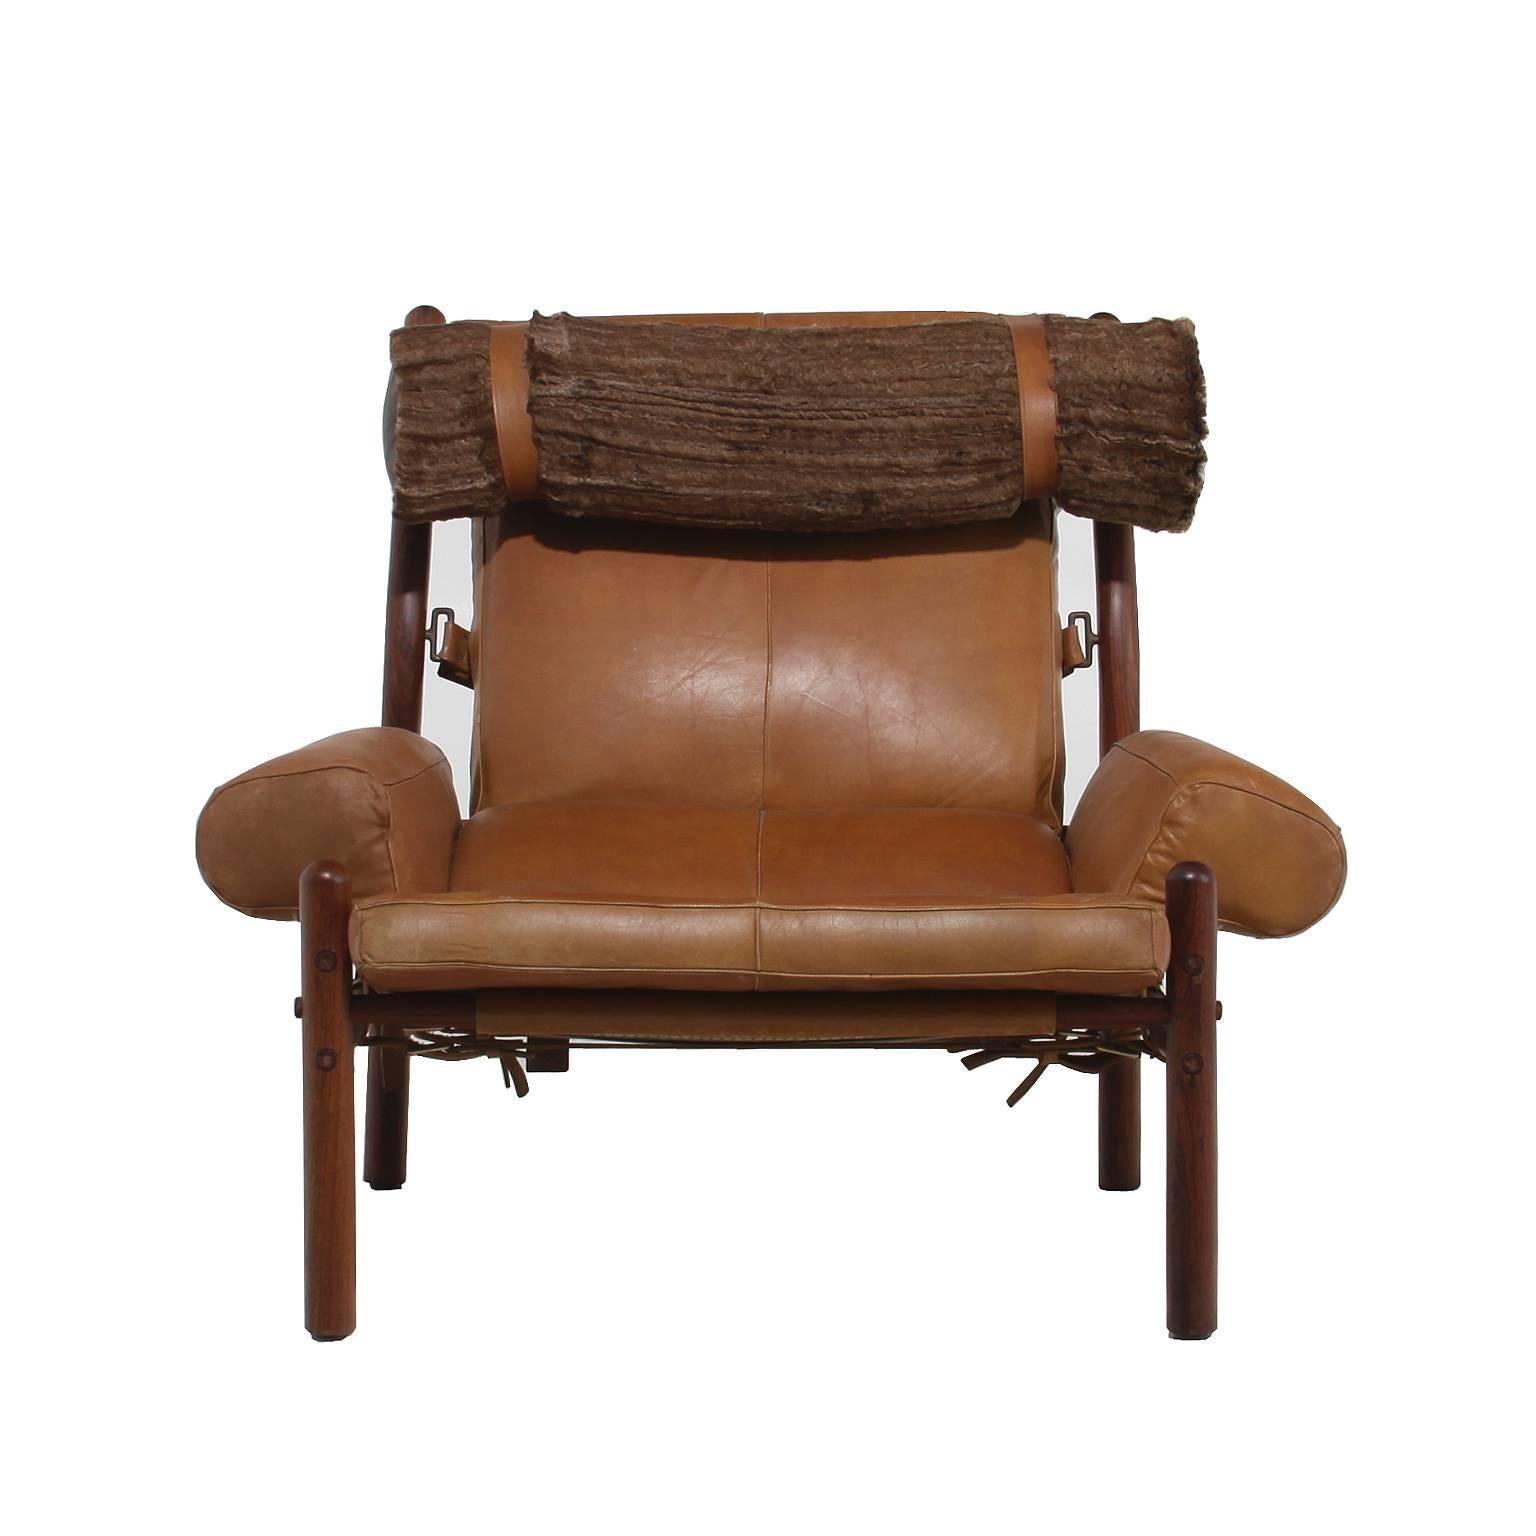 Impressive armchair and ottoman with cognac leather and faux fur pillow by Arne Norell.

Seat height: 35.
Seat depth: 36.

Many pieces are stored in our warehouse, so please click on CONTACT DEALER under our logo below to find out if the pieces